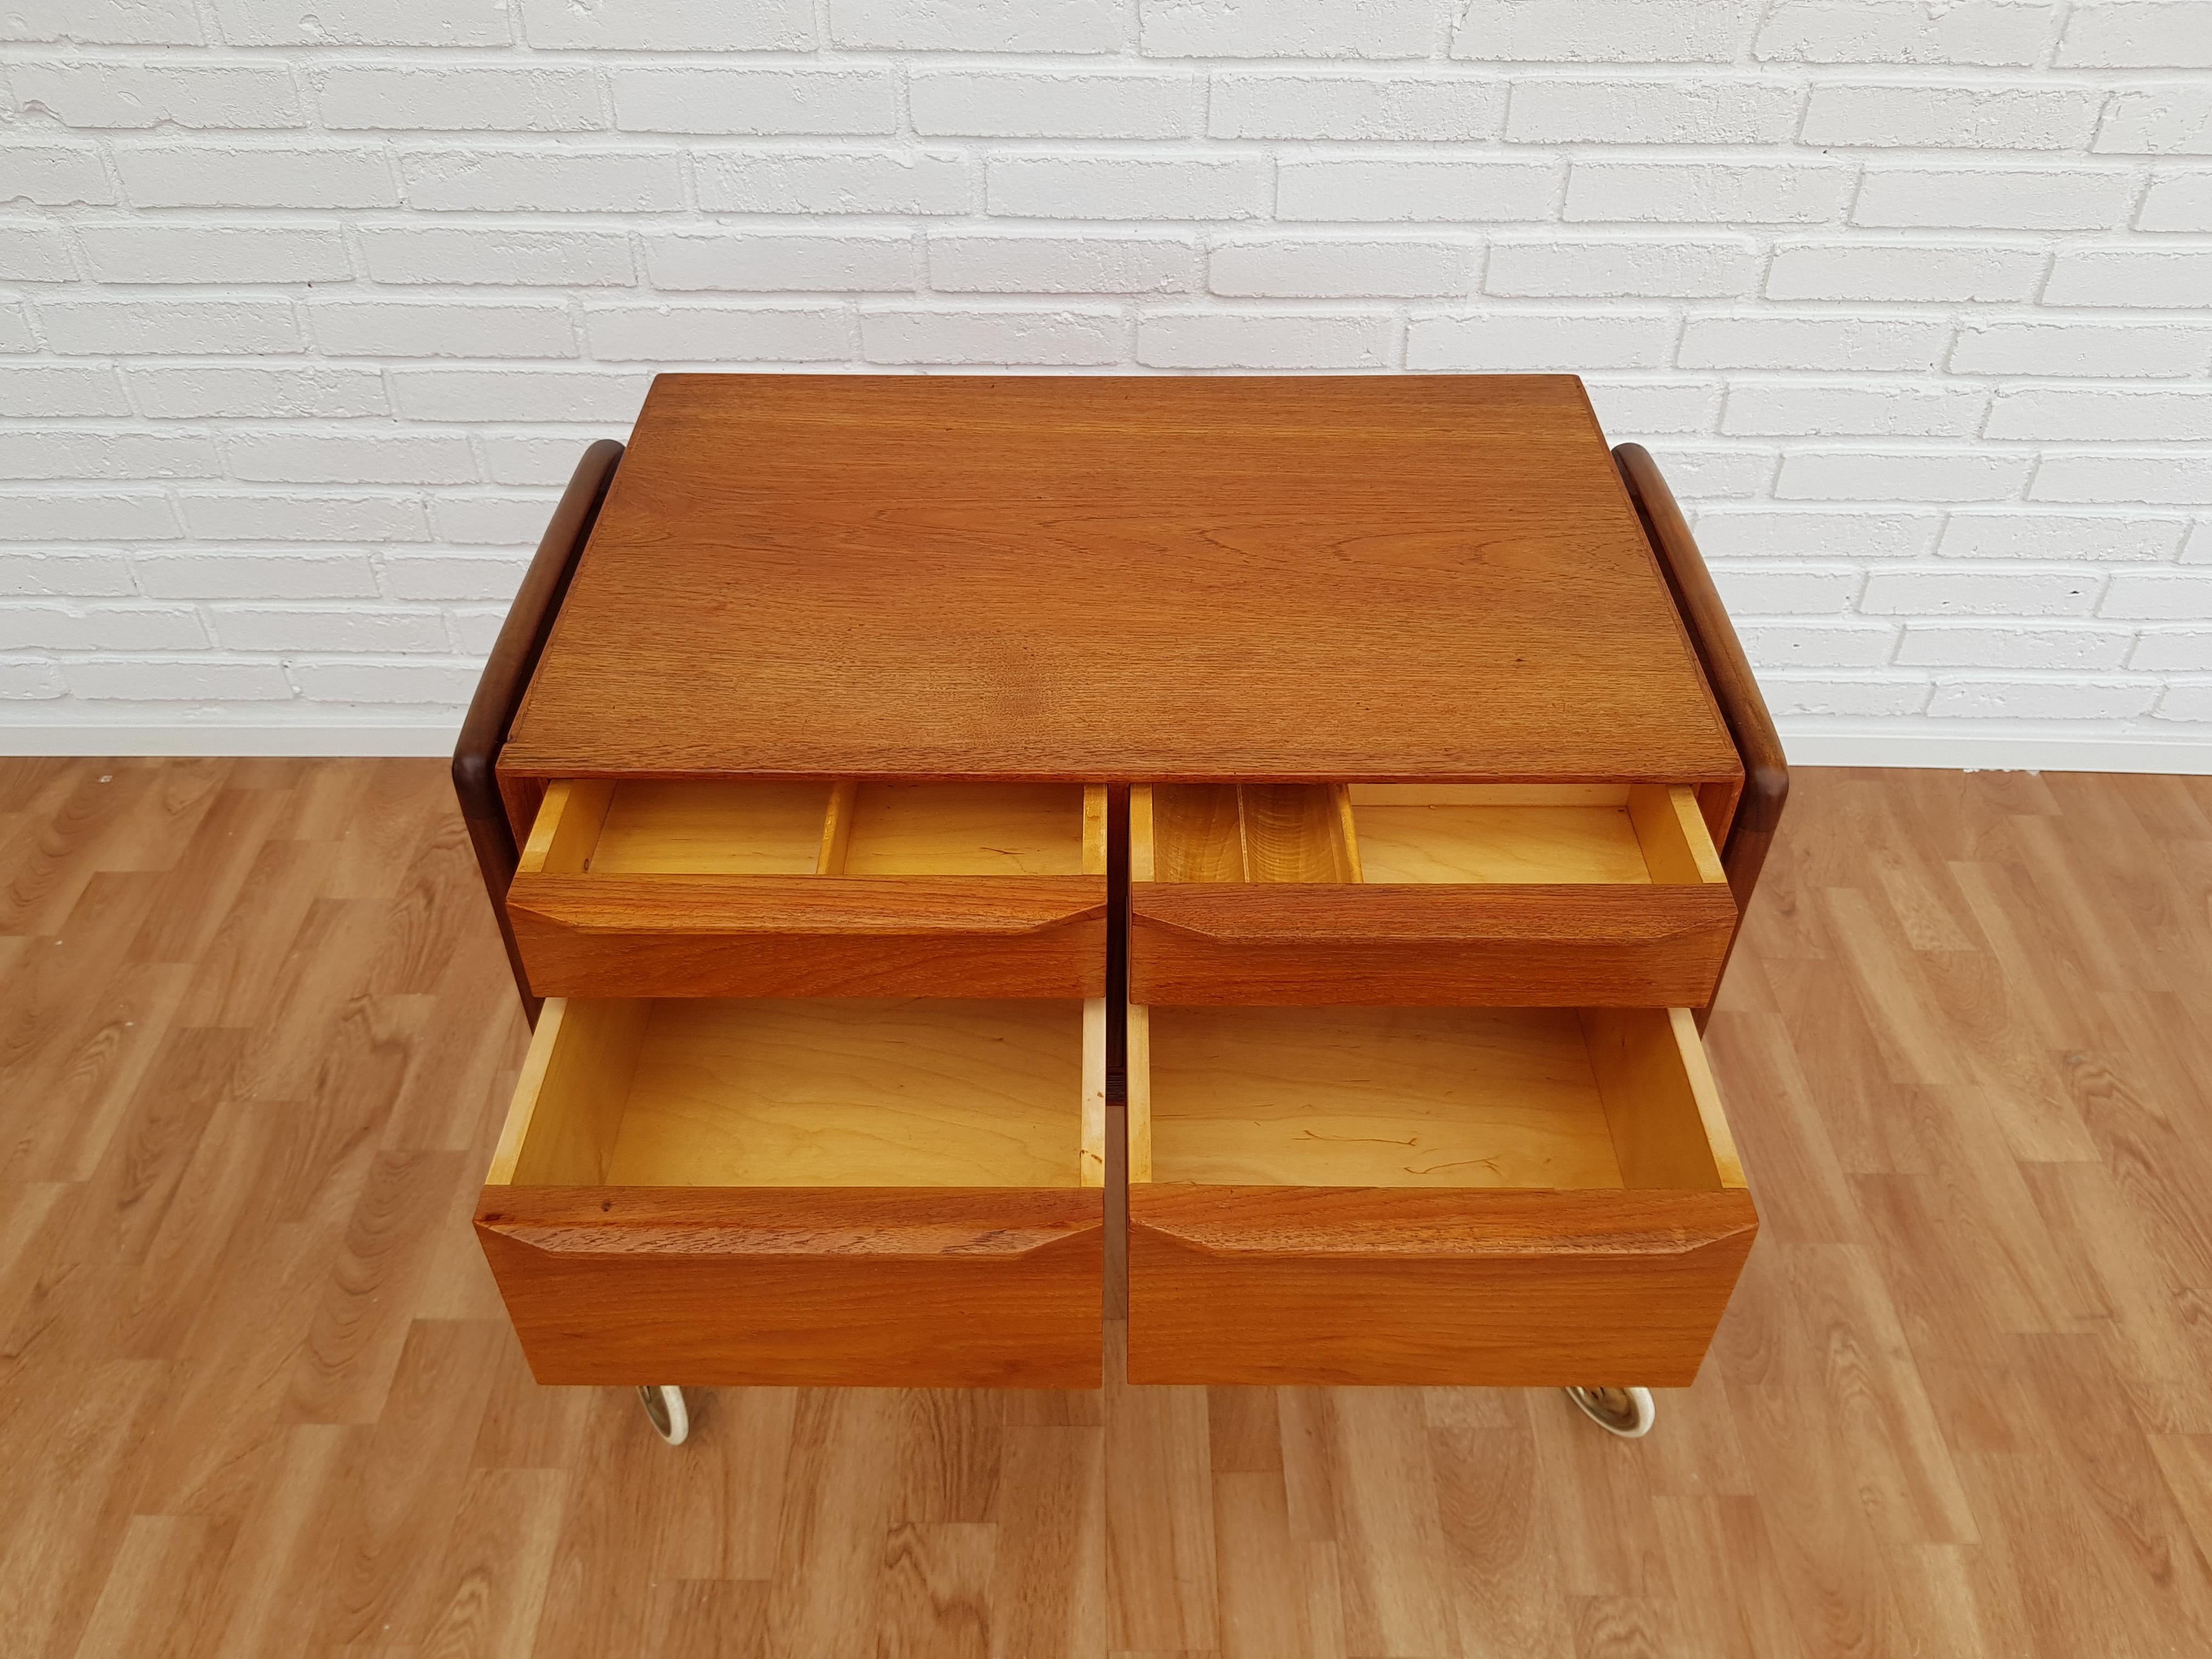 Danish Vintage Sewing Commode, Teak Wood In Good Condition For Sale In Tarm, DK